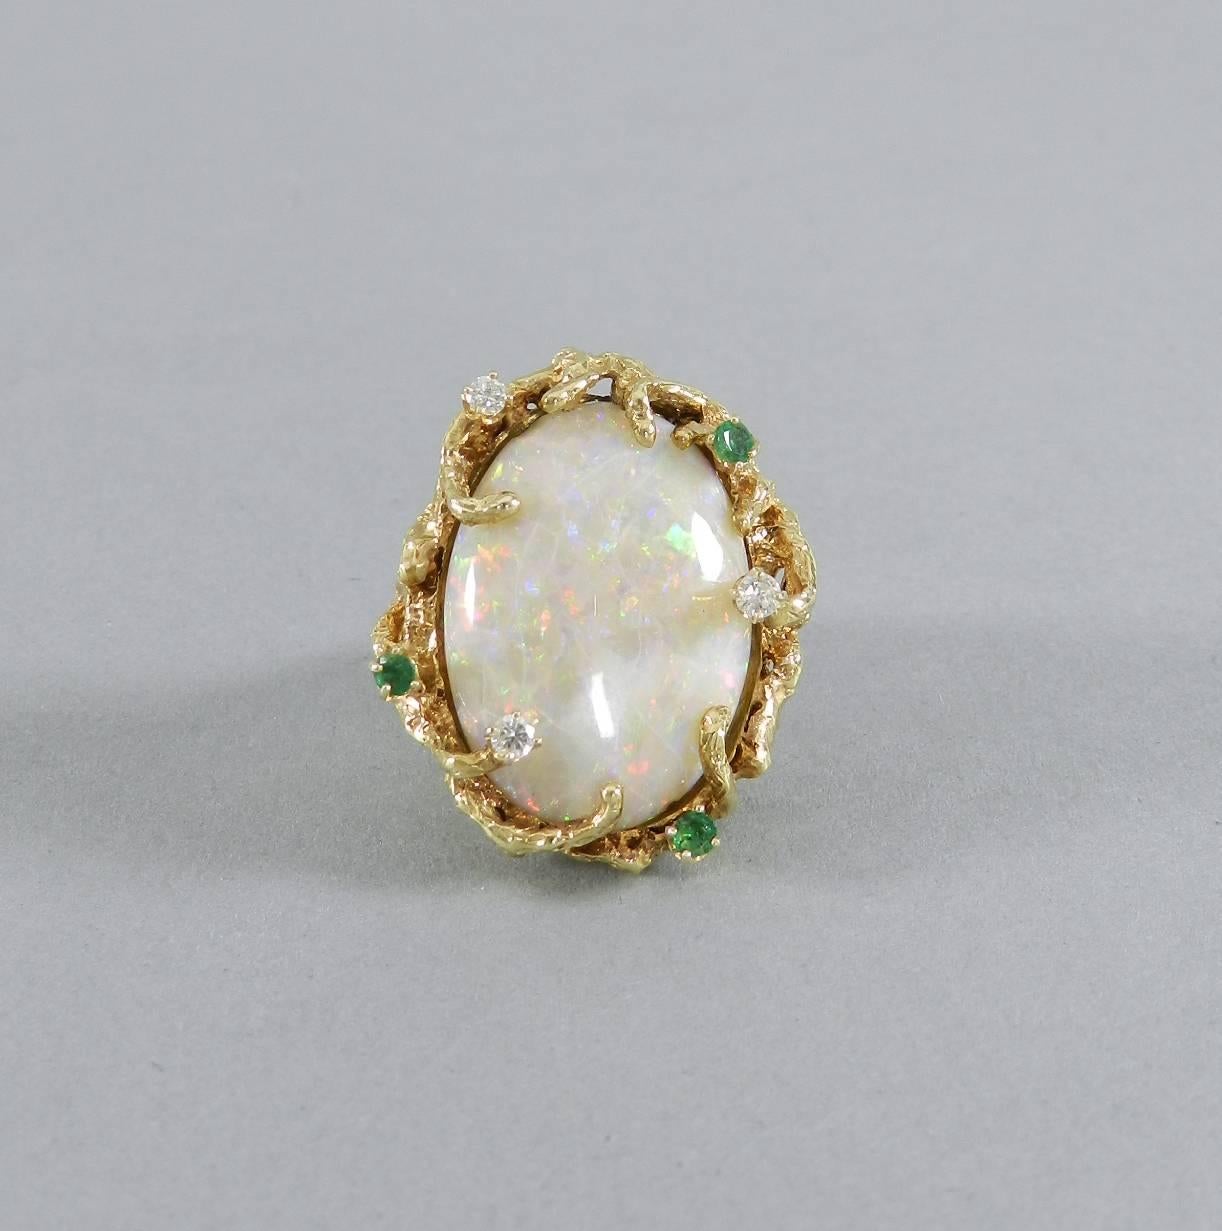 Vintage circa 1970's bold organic cocktail ring.  Large statement ring with one of a kind custom design. 14k yellow gold with opal center, diamonds, and emeralds. Ring size USA 7.  1 oval cabochon white opal - approximate total weight 21.85ct.  3